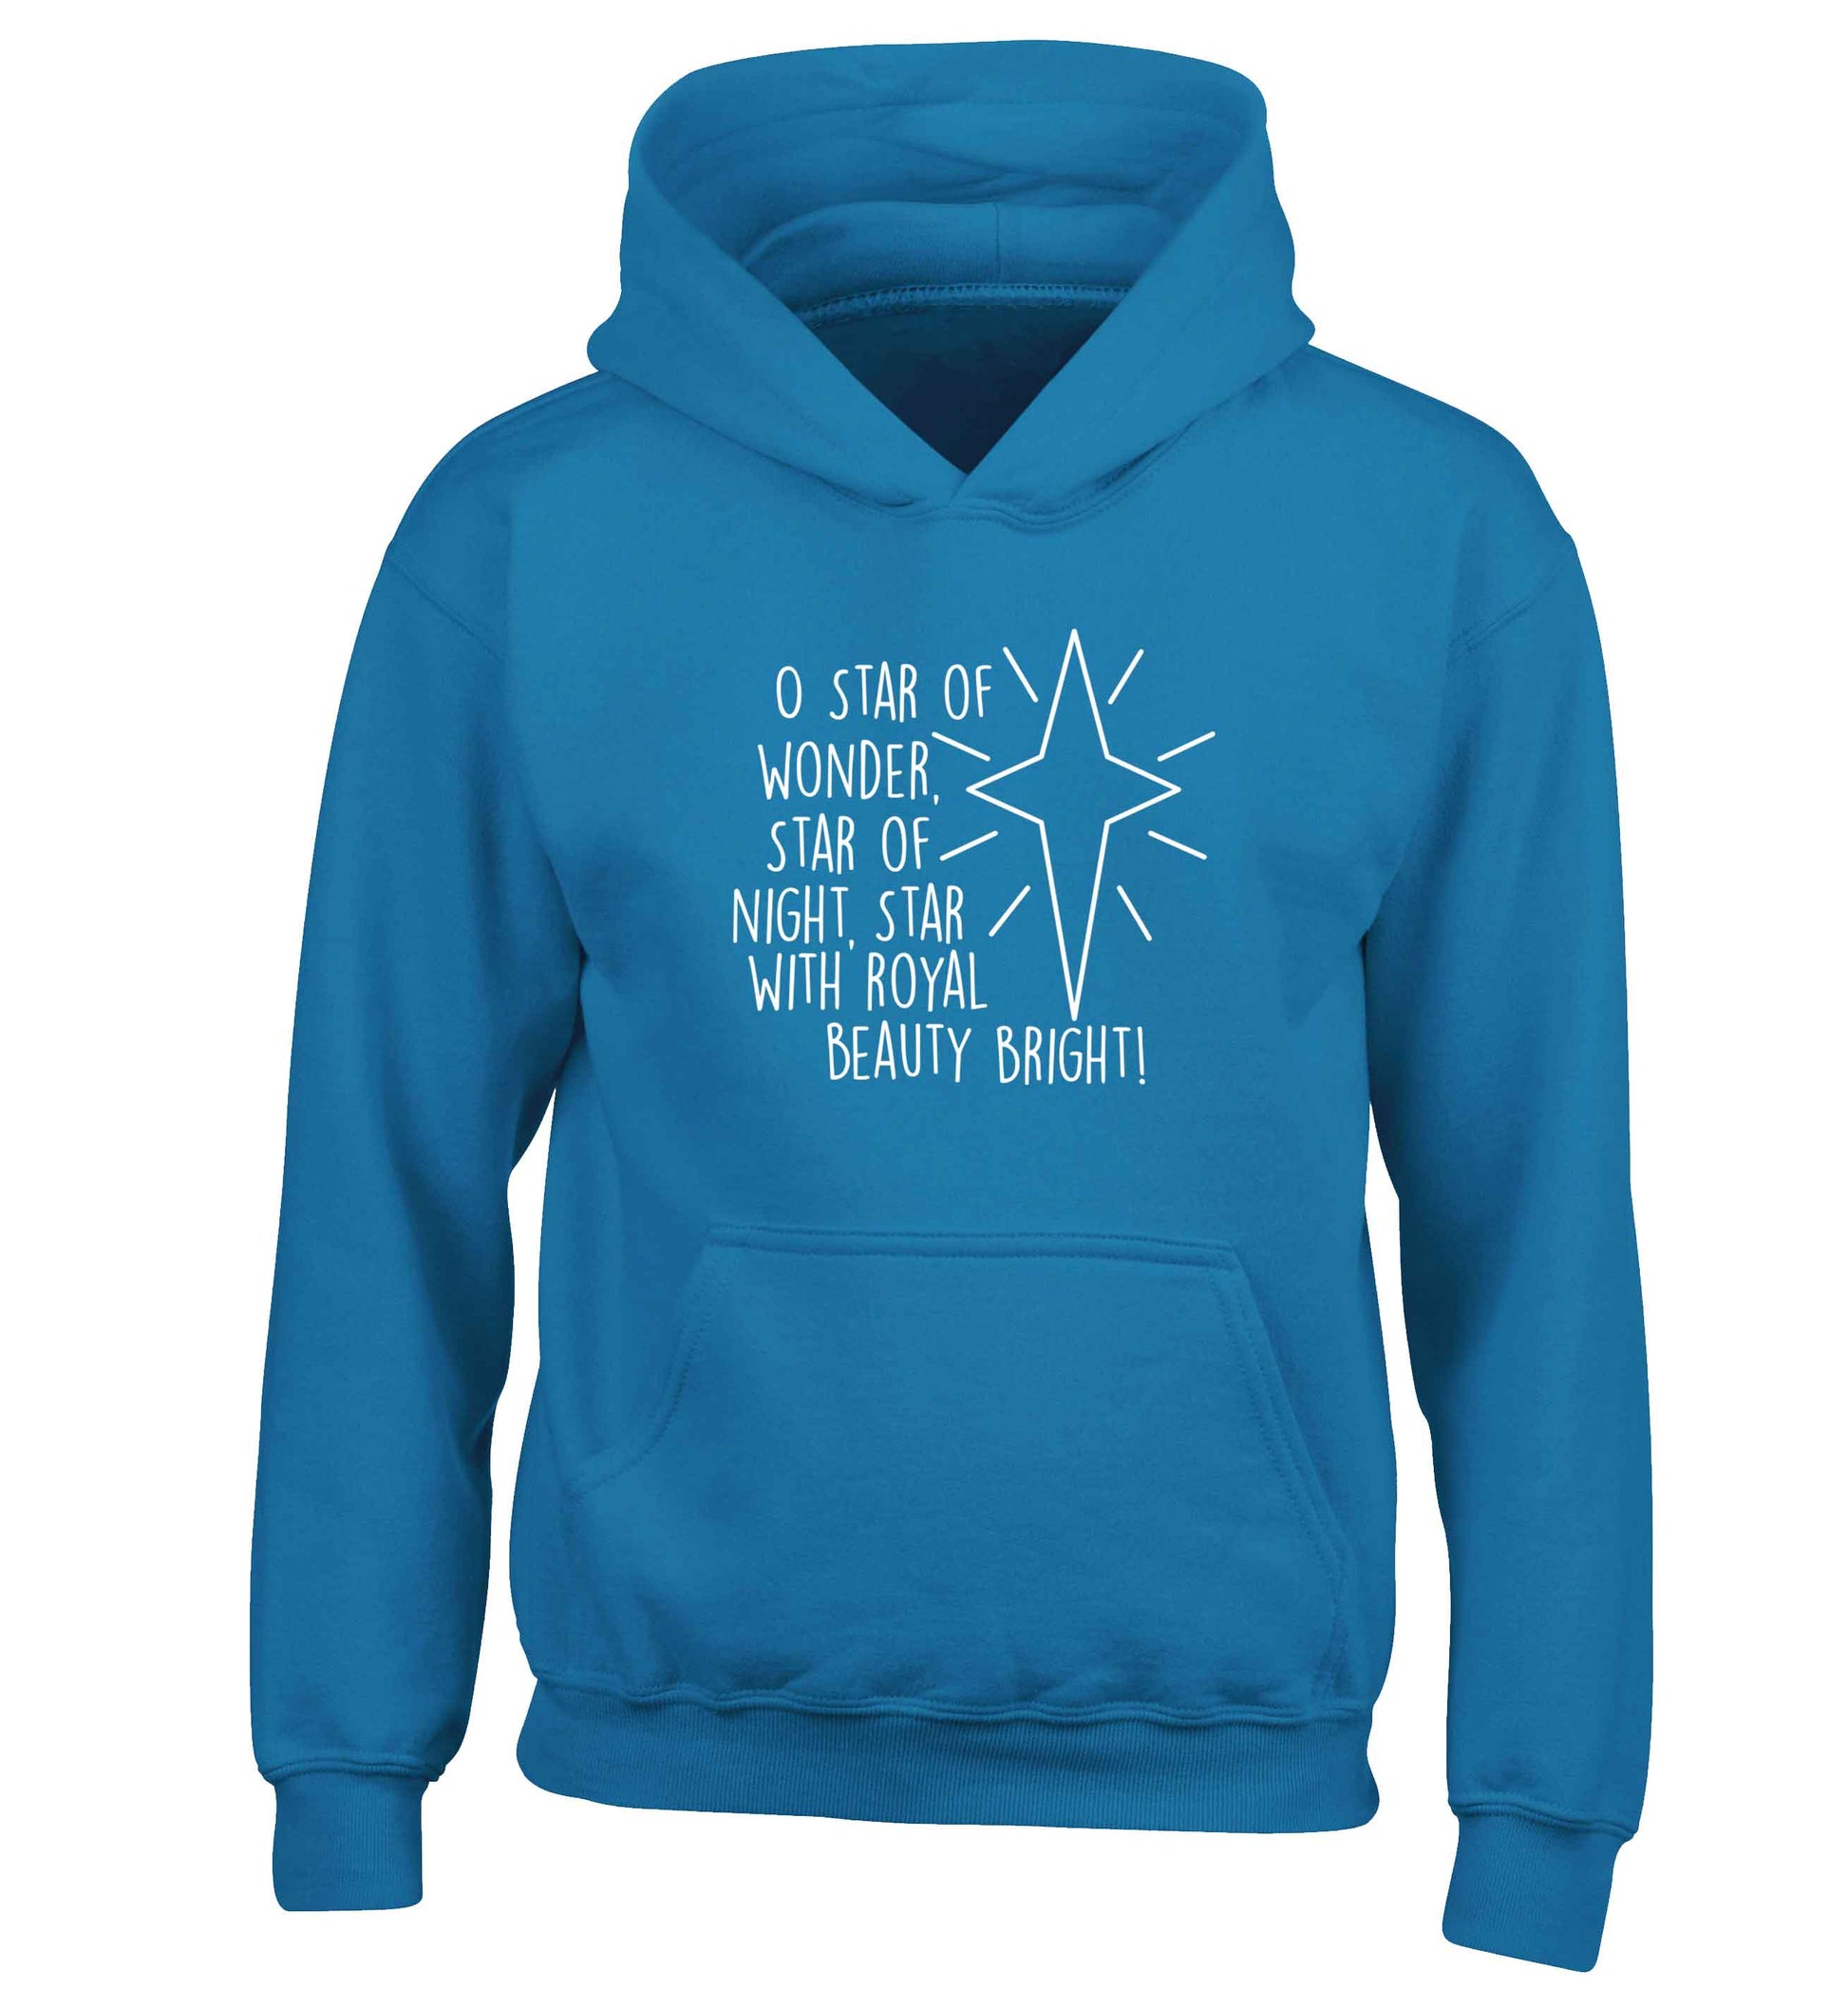 Oh star of wonder star of night, star with royal beauty bright children's blue hoodie 12-13 Years